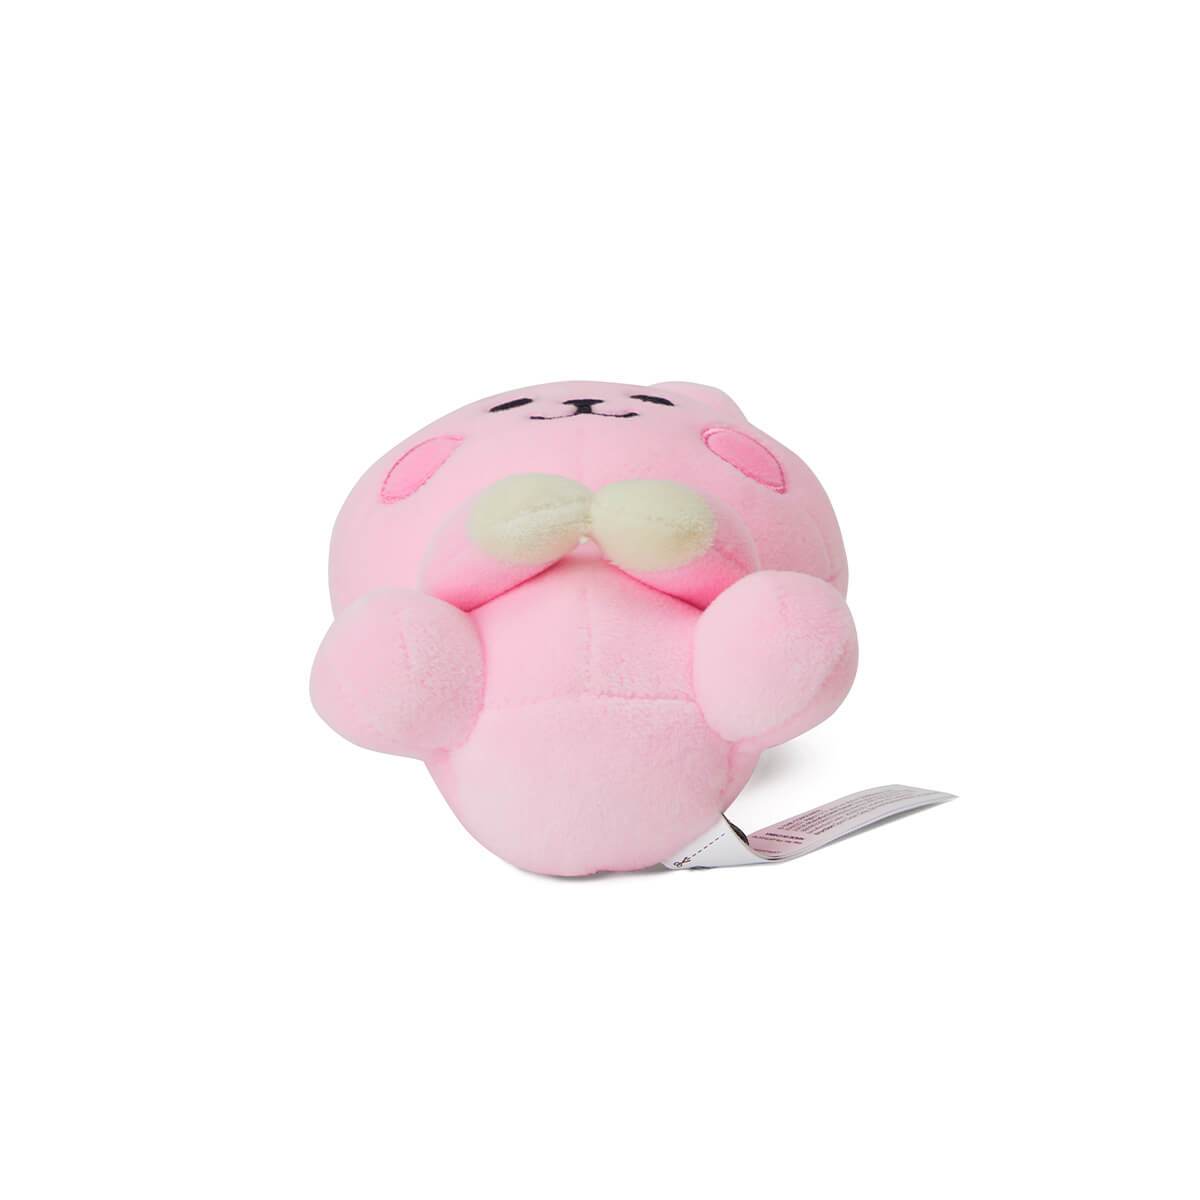 BT21 COOKY Baby Sitting Doll 4.7 inch